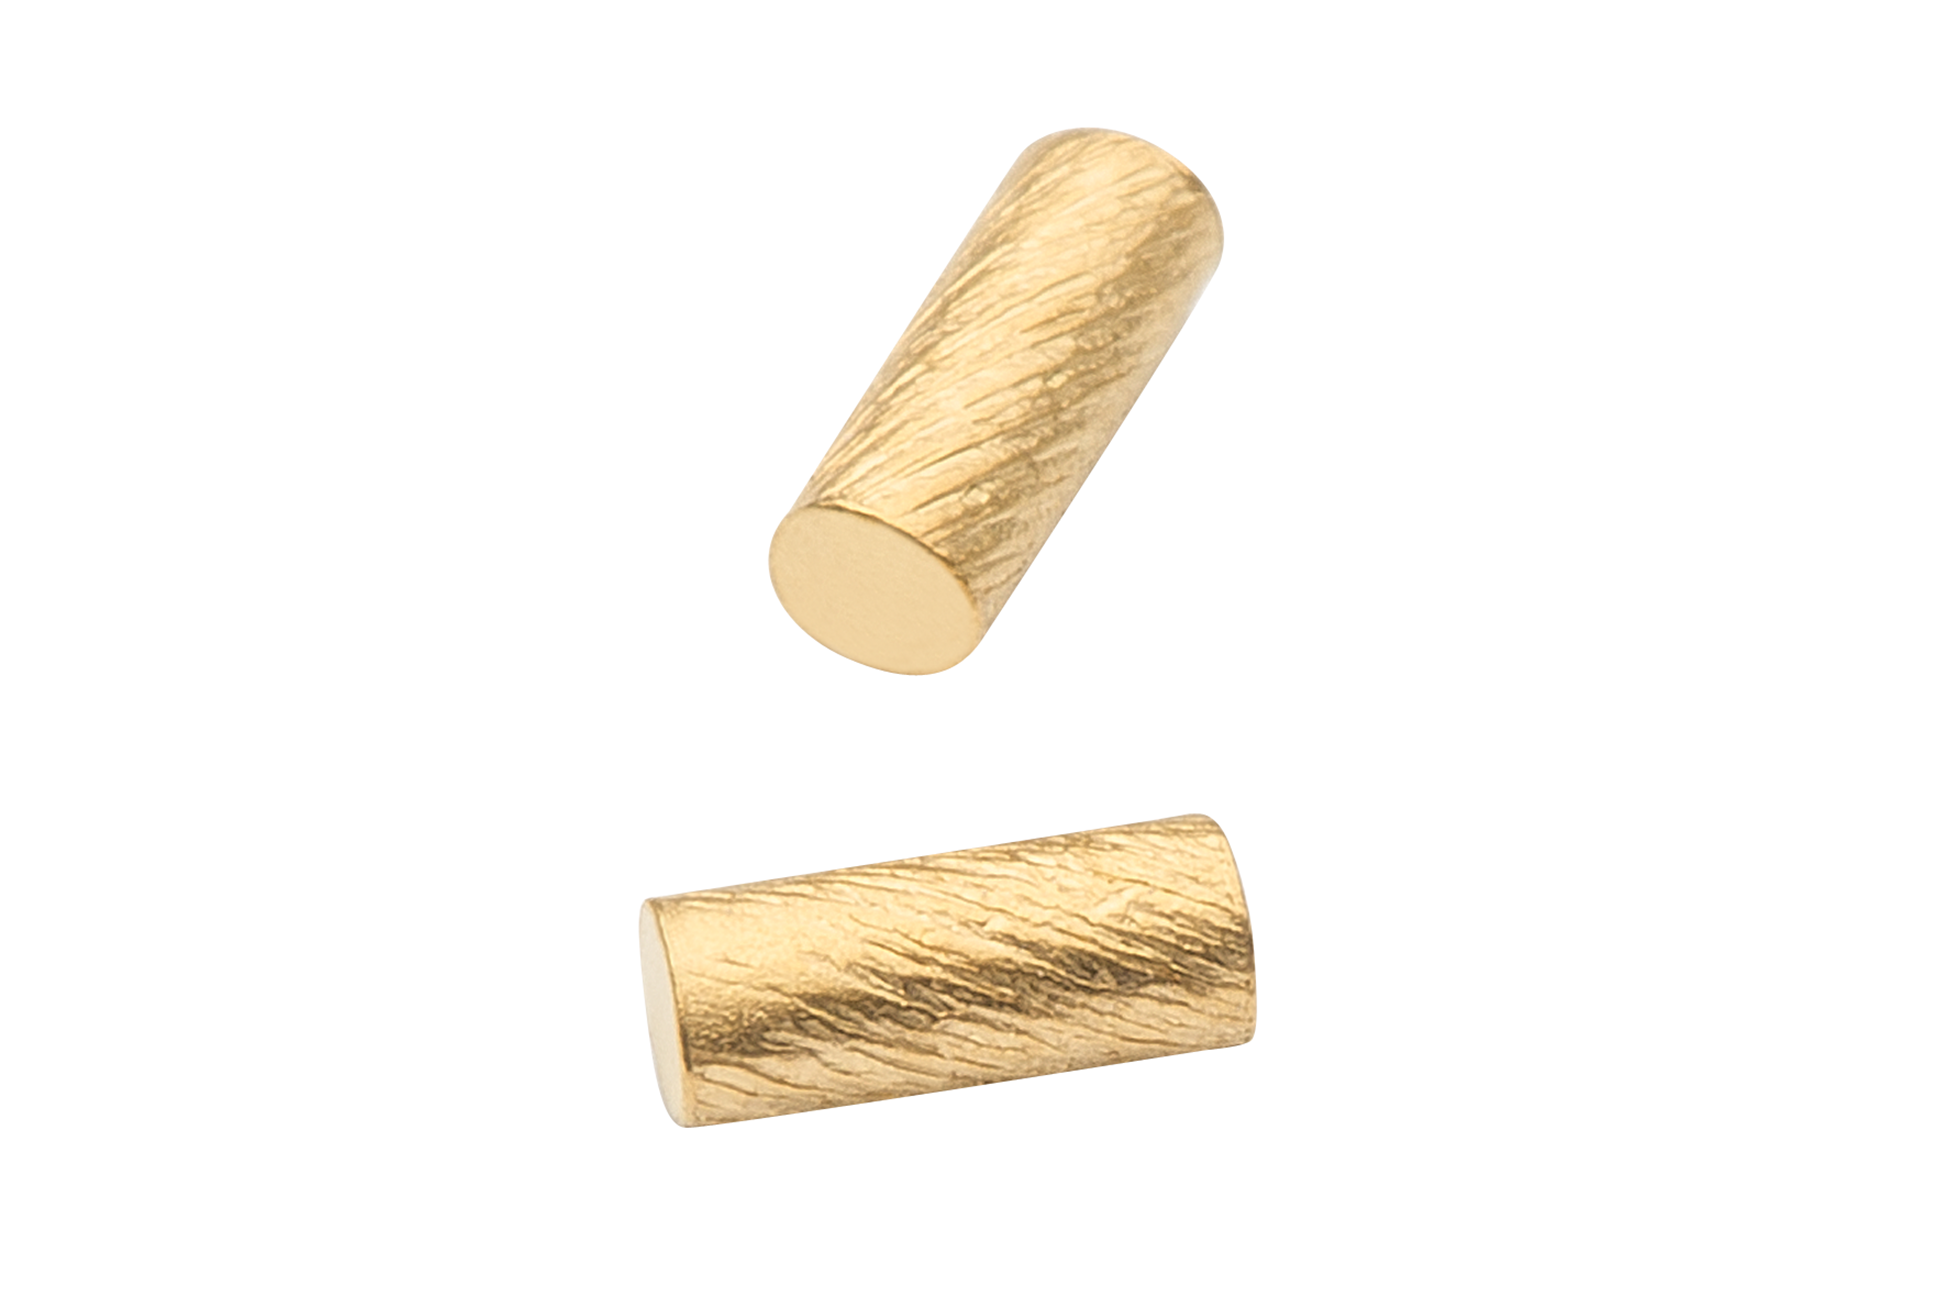 Goldmarker with knurled surface